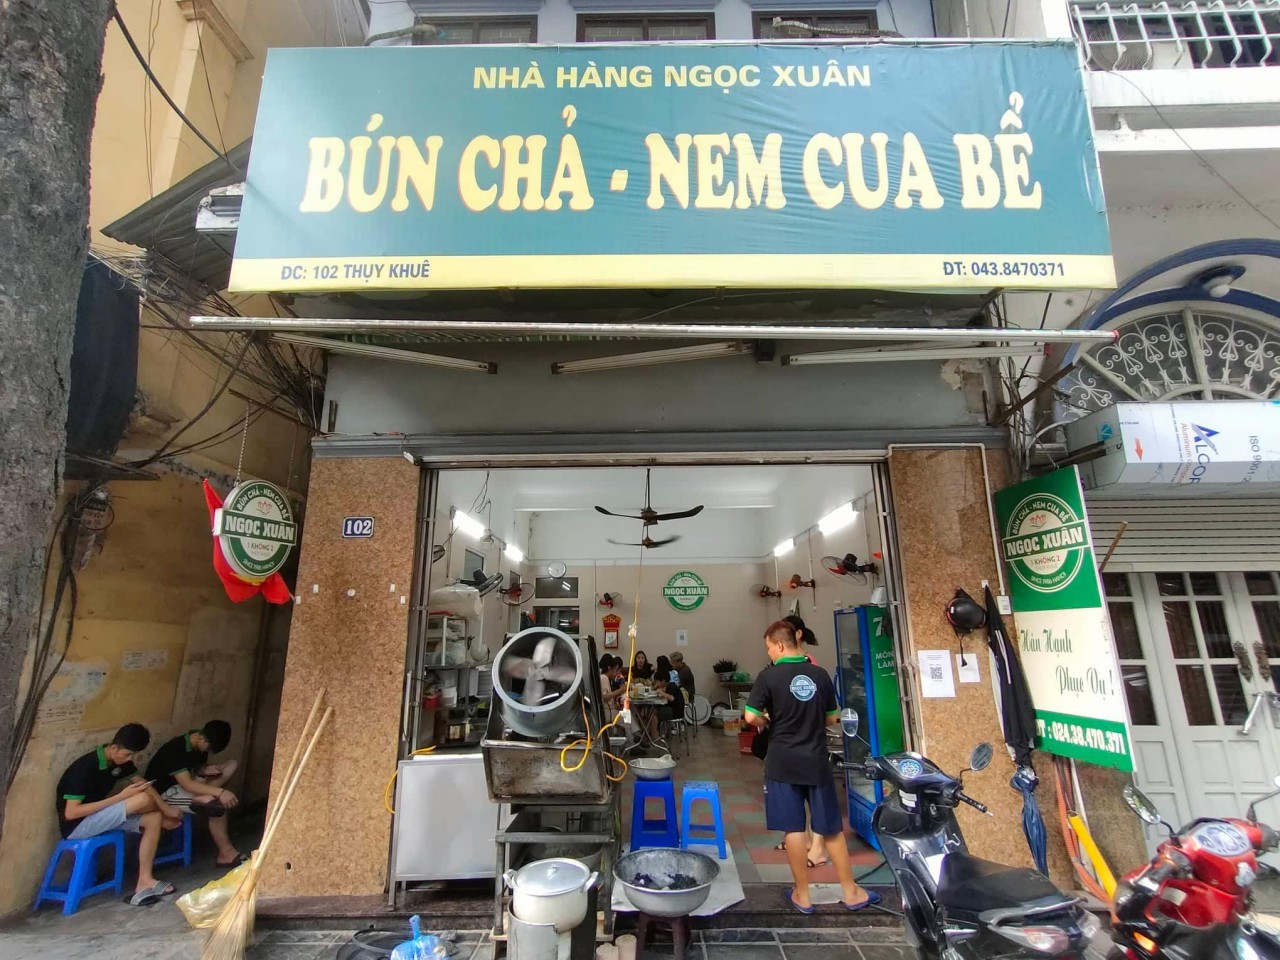 The Hunt for the Perfect Bun Cha